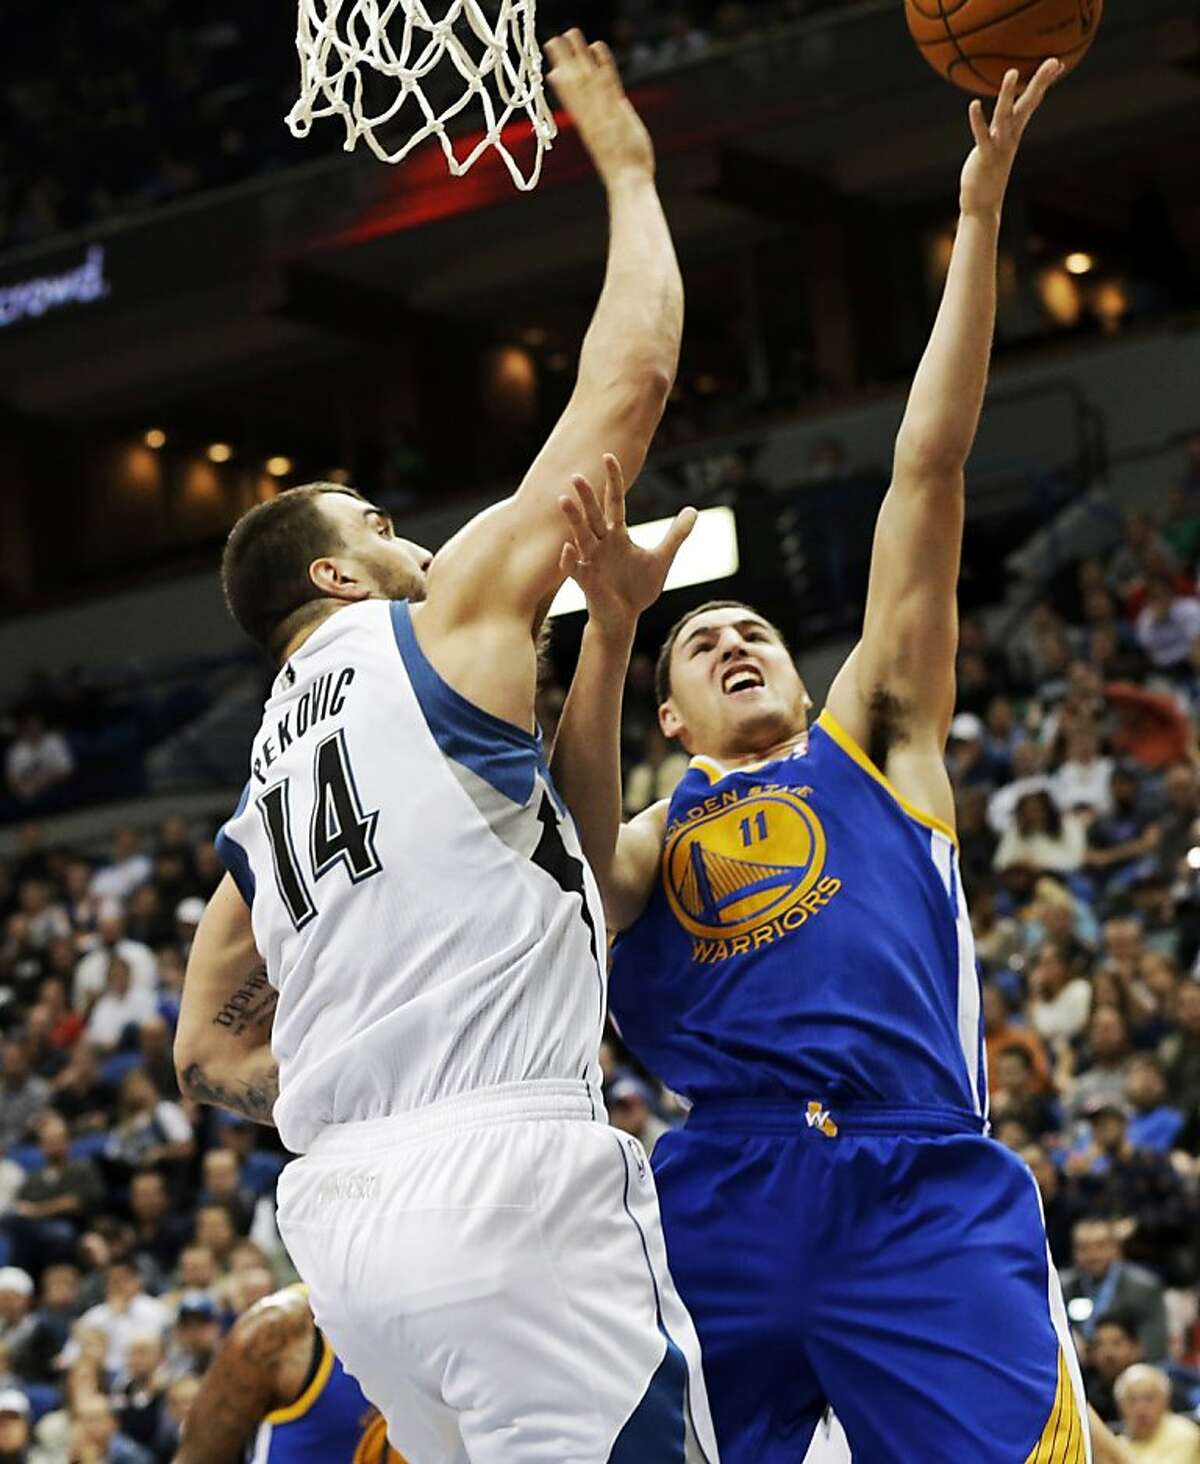 Golden State Warriors' Klay Thompson, right, shoots as Minnesota Timberwolves' Nikola Pekovic, of Montenegro, defends in the second half of an NBA basketball game Wednesday, Nov. 6, 2013, in Minneapolis. Thompson led the Warriors with 30 points in their 106-93 win. (AP Photo/Jim Mone)